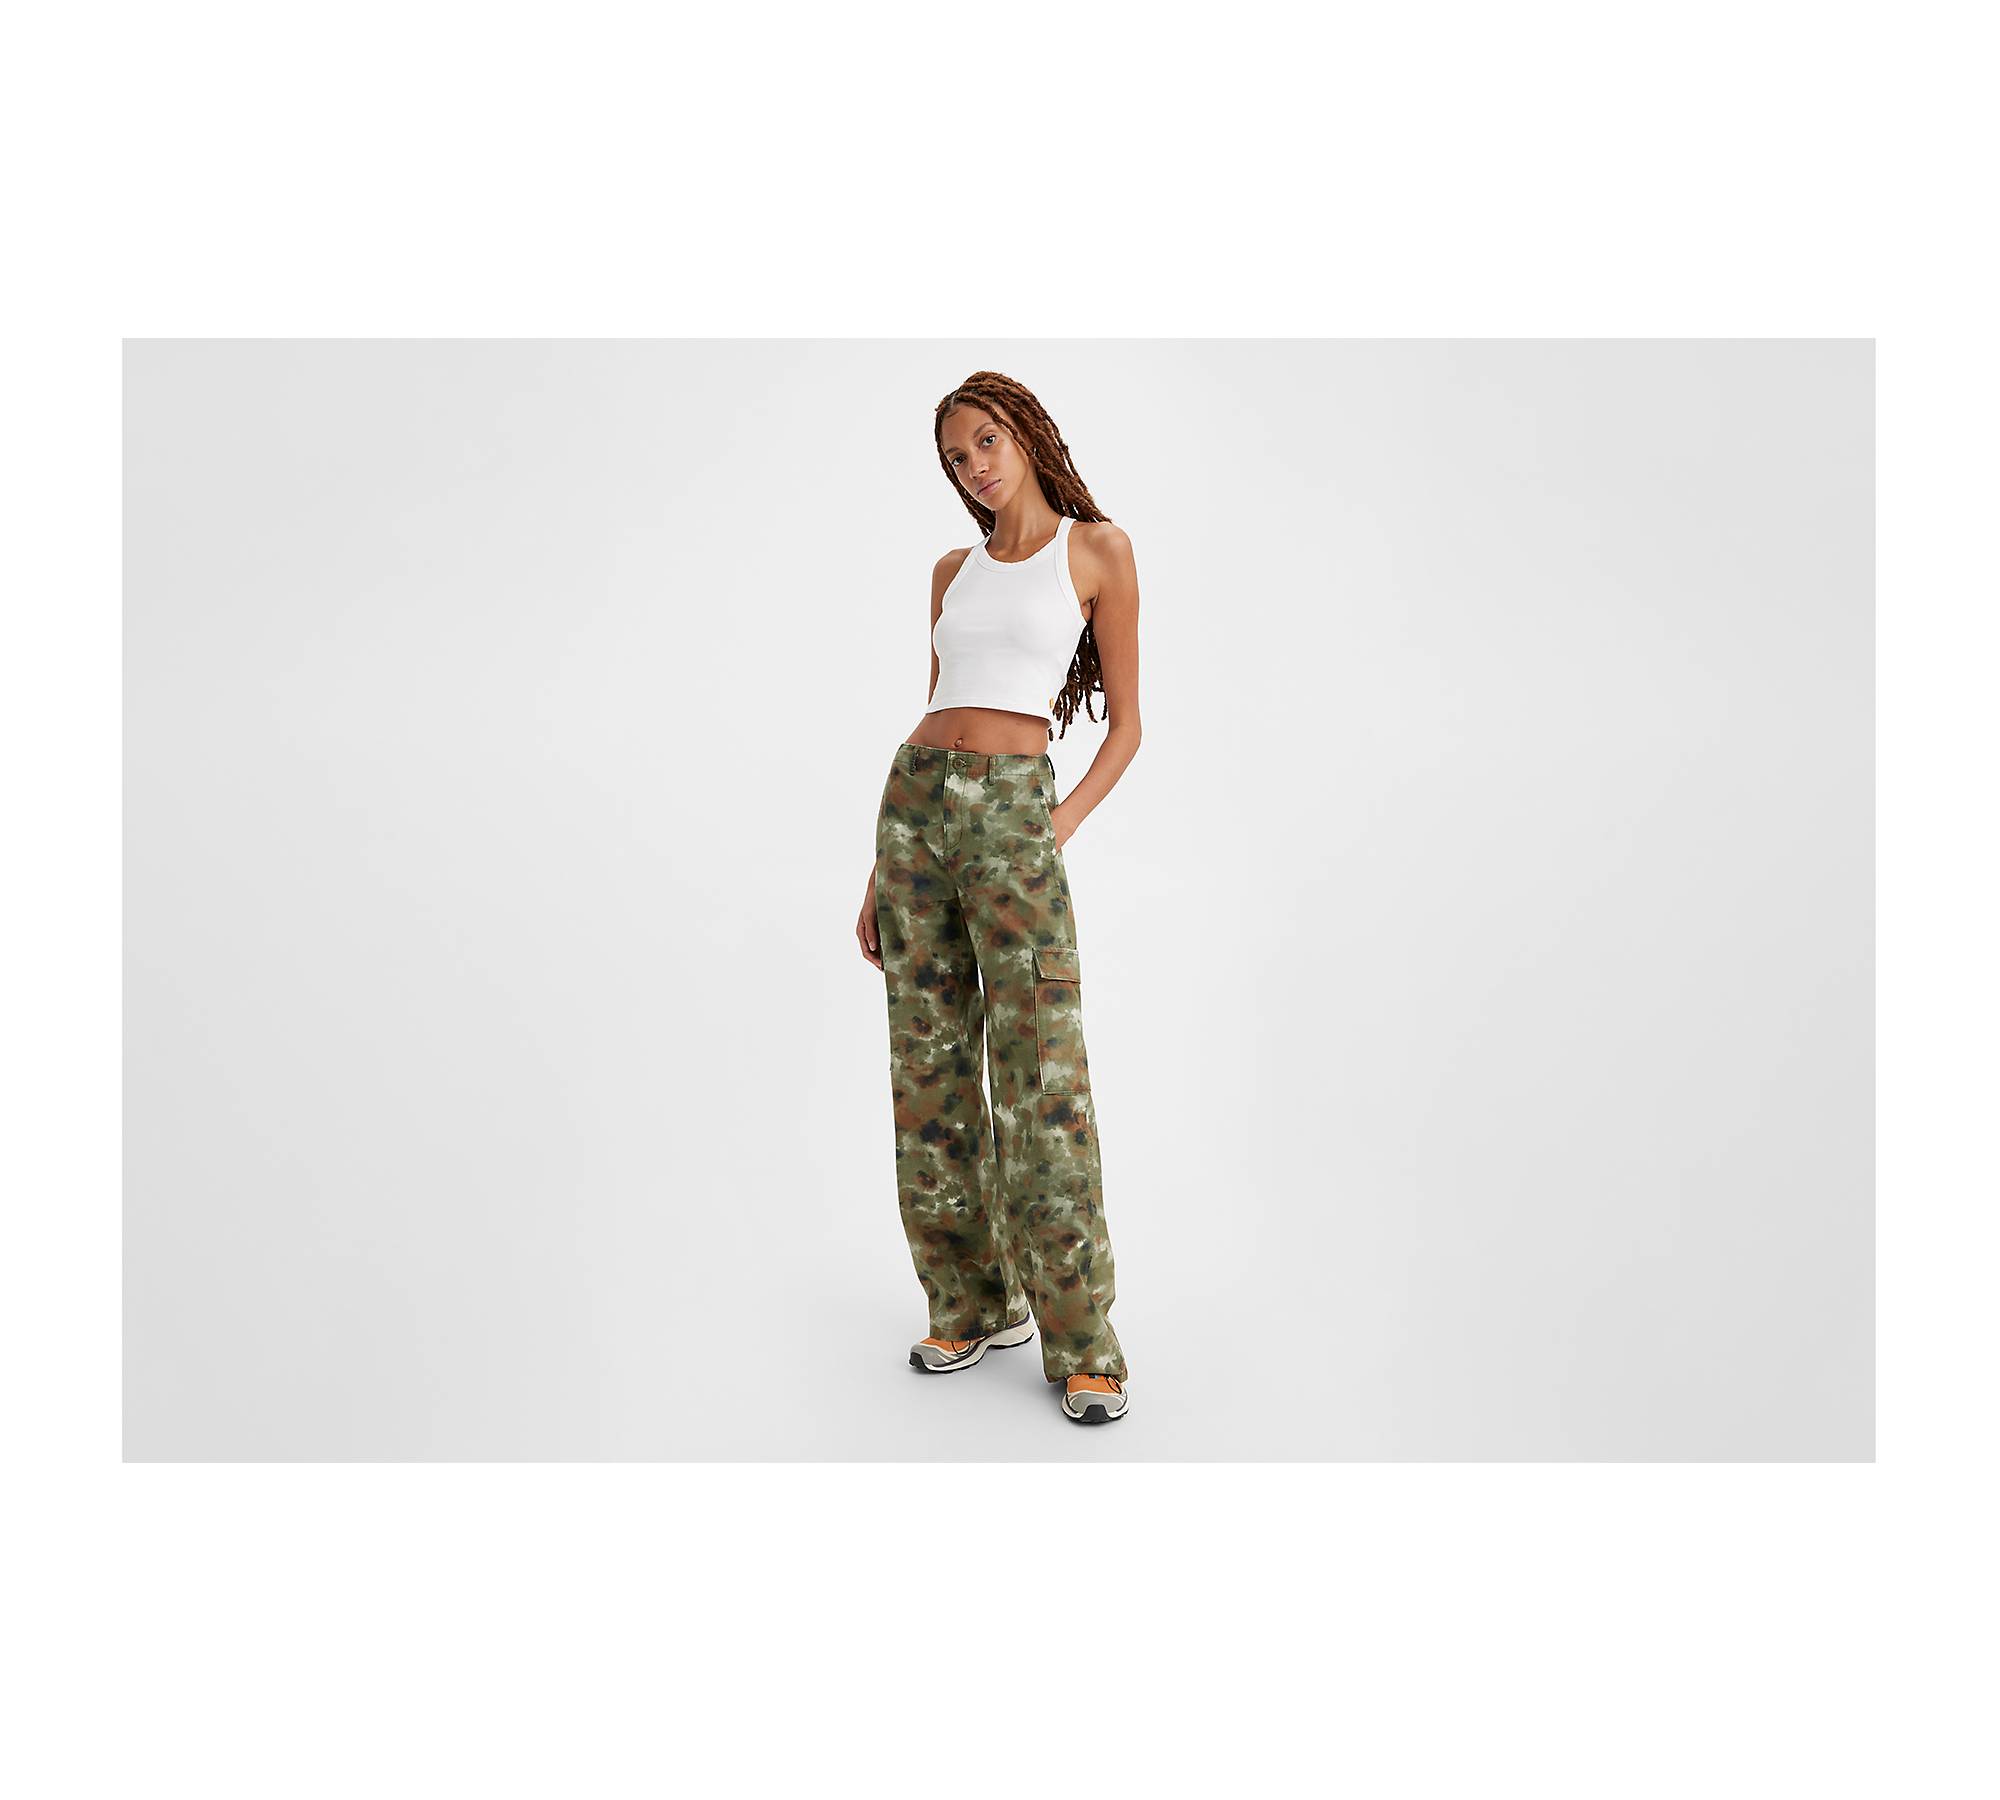 Women’s green and pink camo cargo pants 